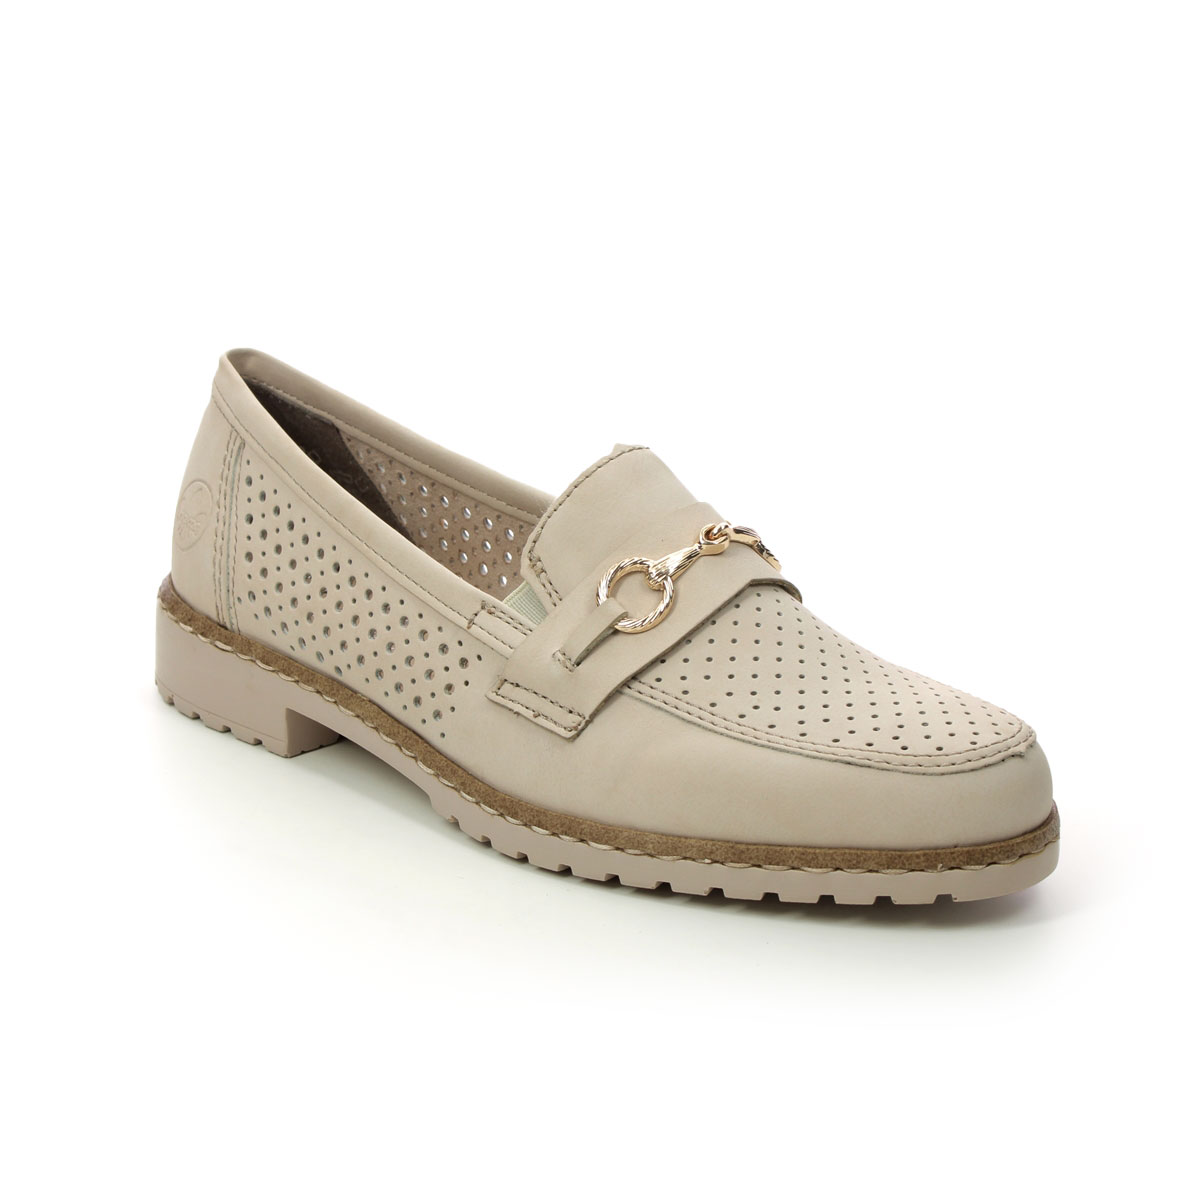 Rieker 51865-60 Beige nubuck Womens loafers in a Plain Leather and Man-made in Size 40